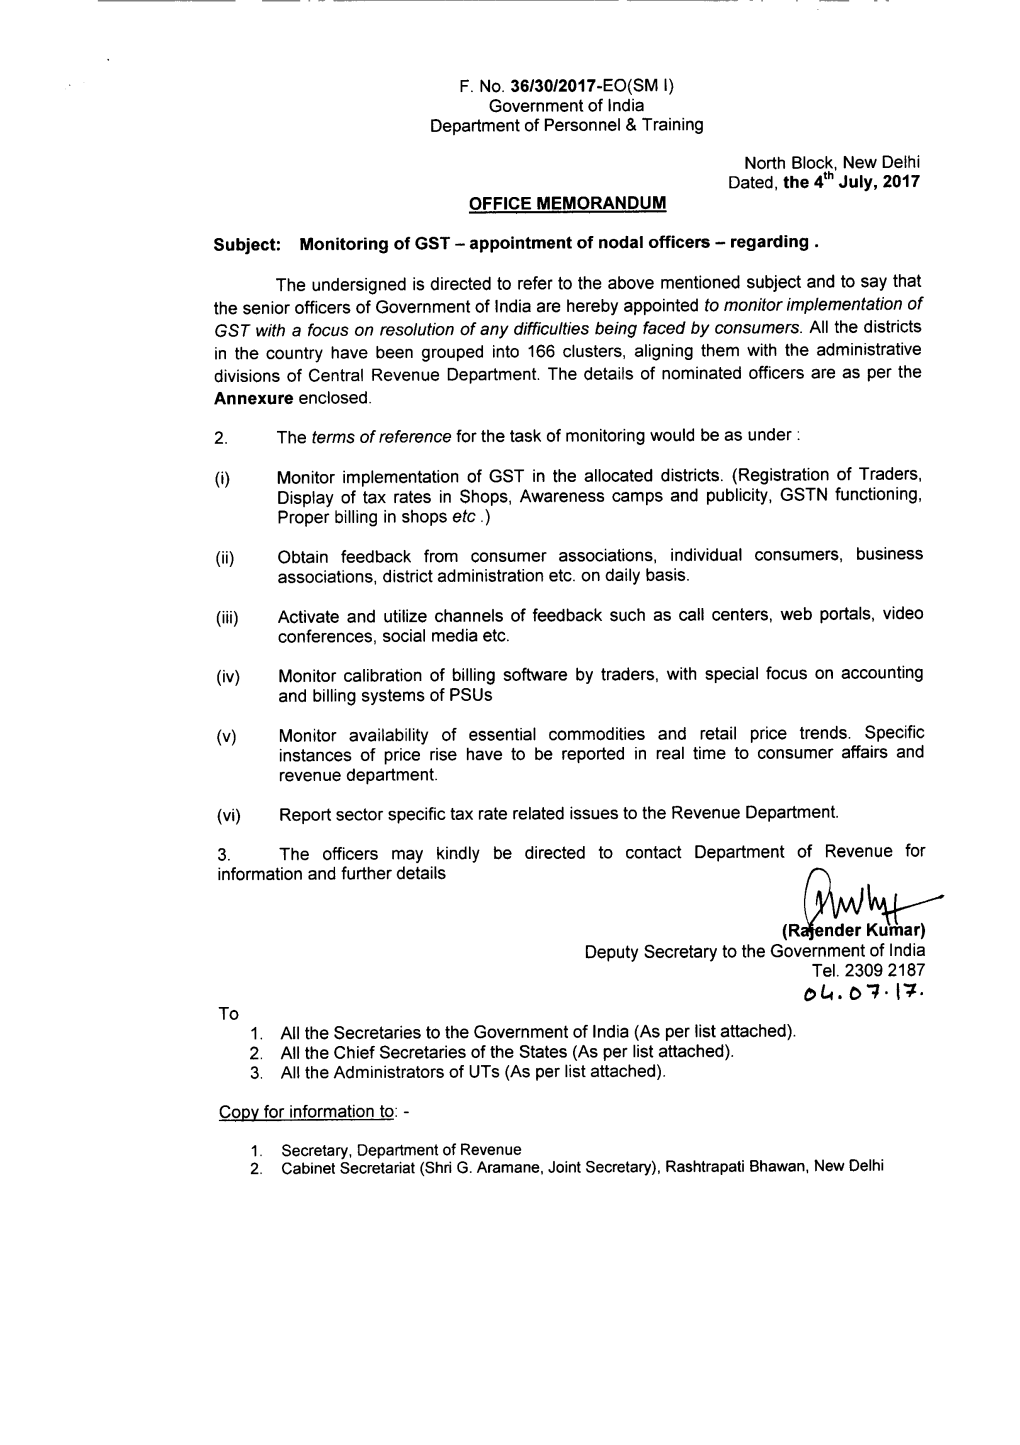 Monitoring of GST – Appointment of Nodal Officers